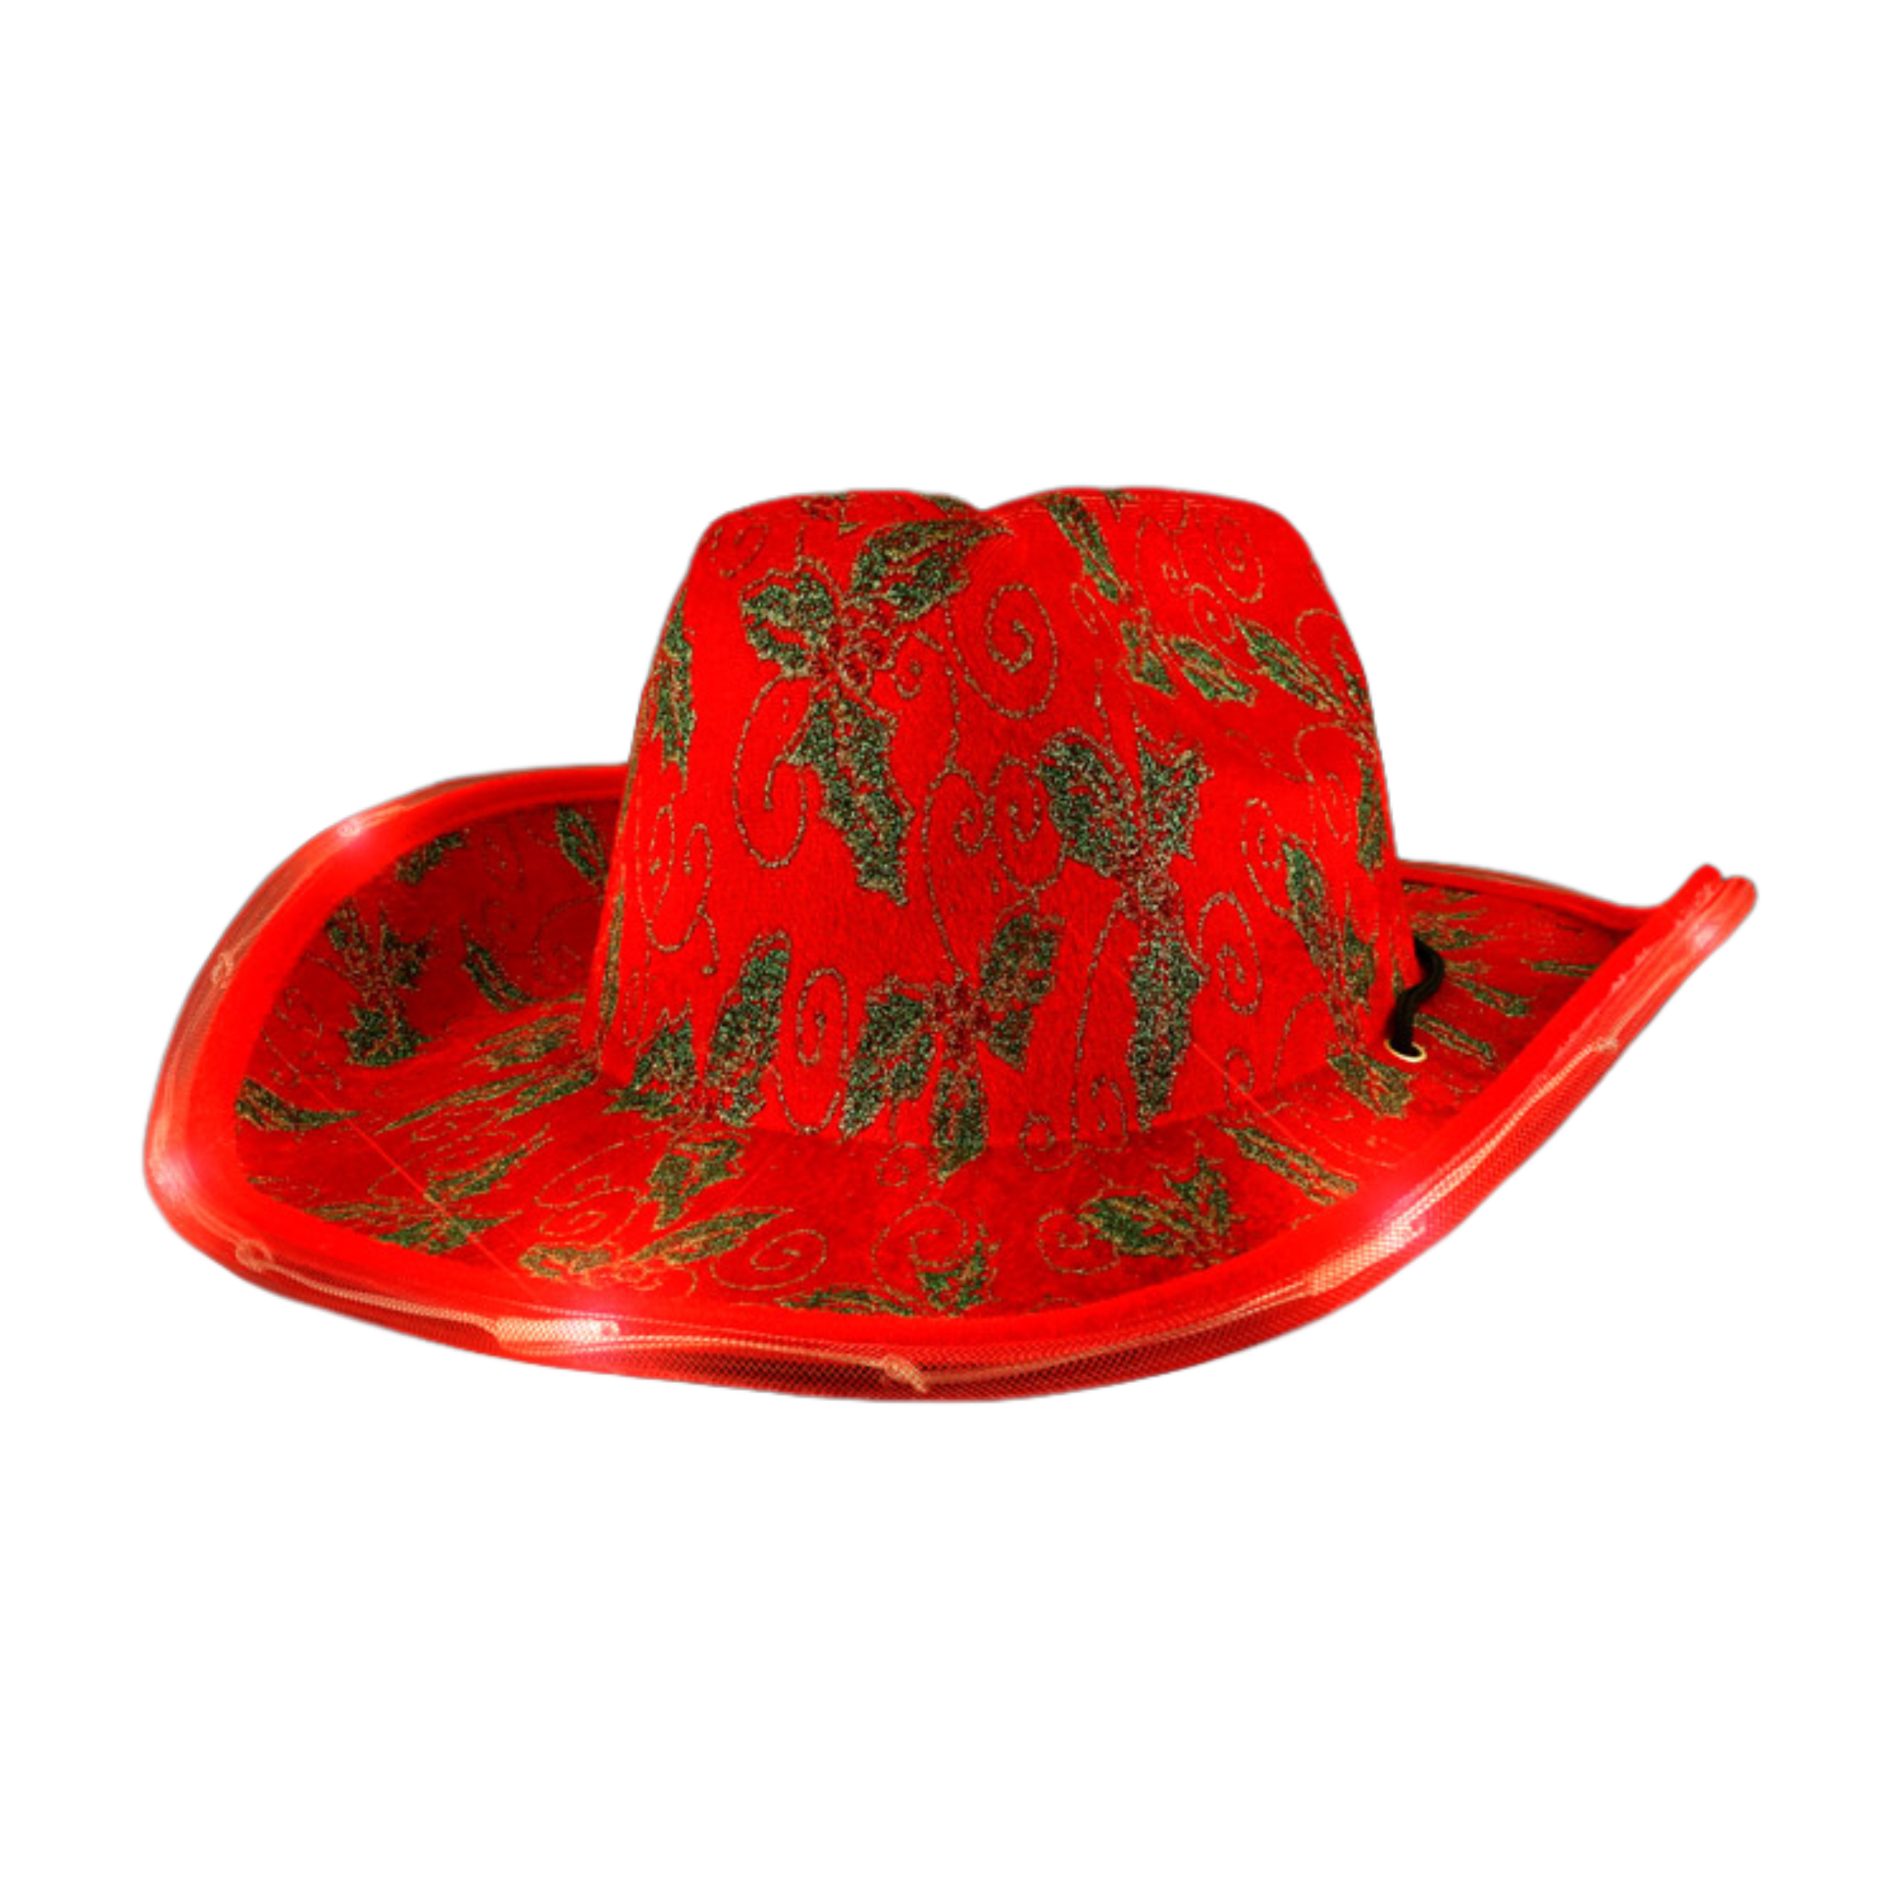 Light Up Holly Leaves and Glitz Red Christmas Cowboy Hat All Products 3